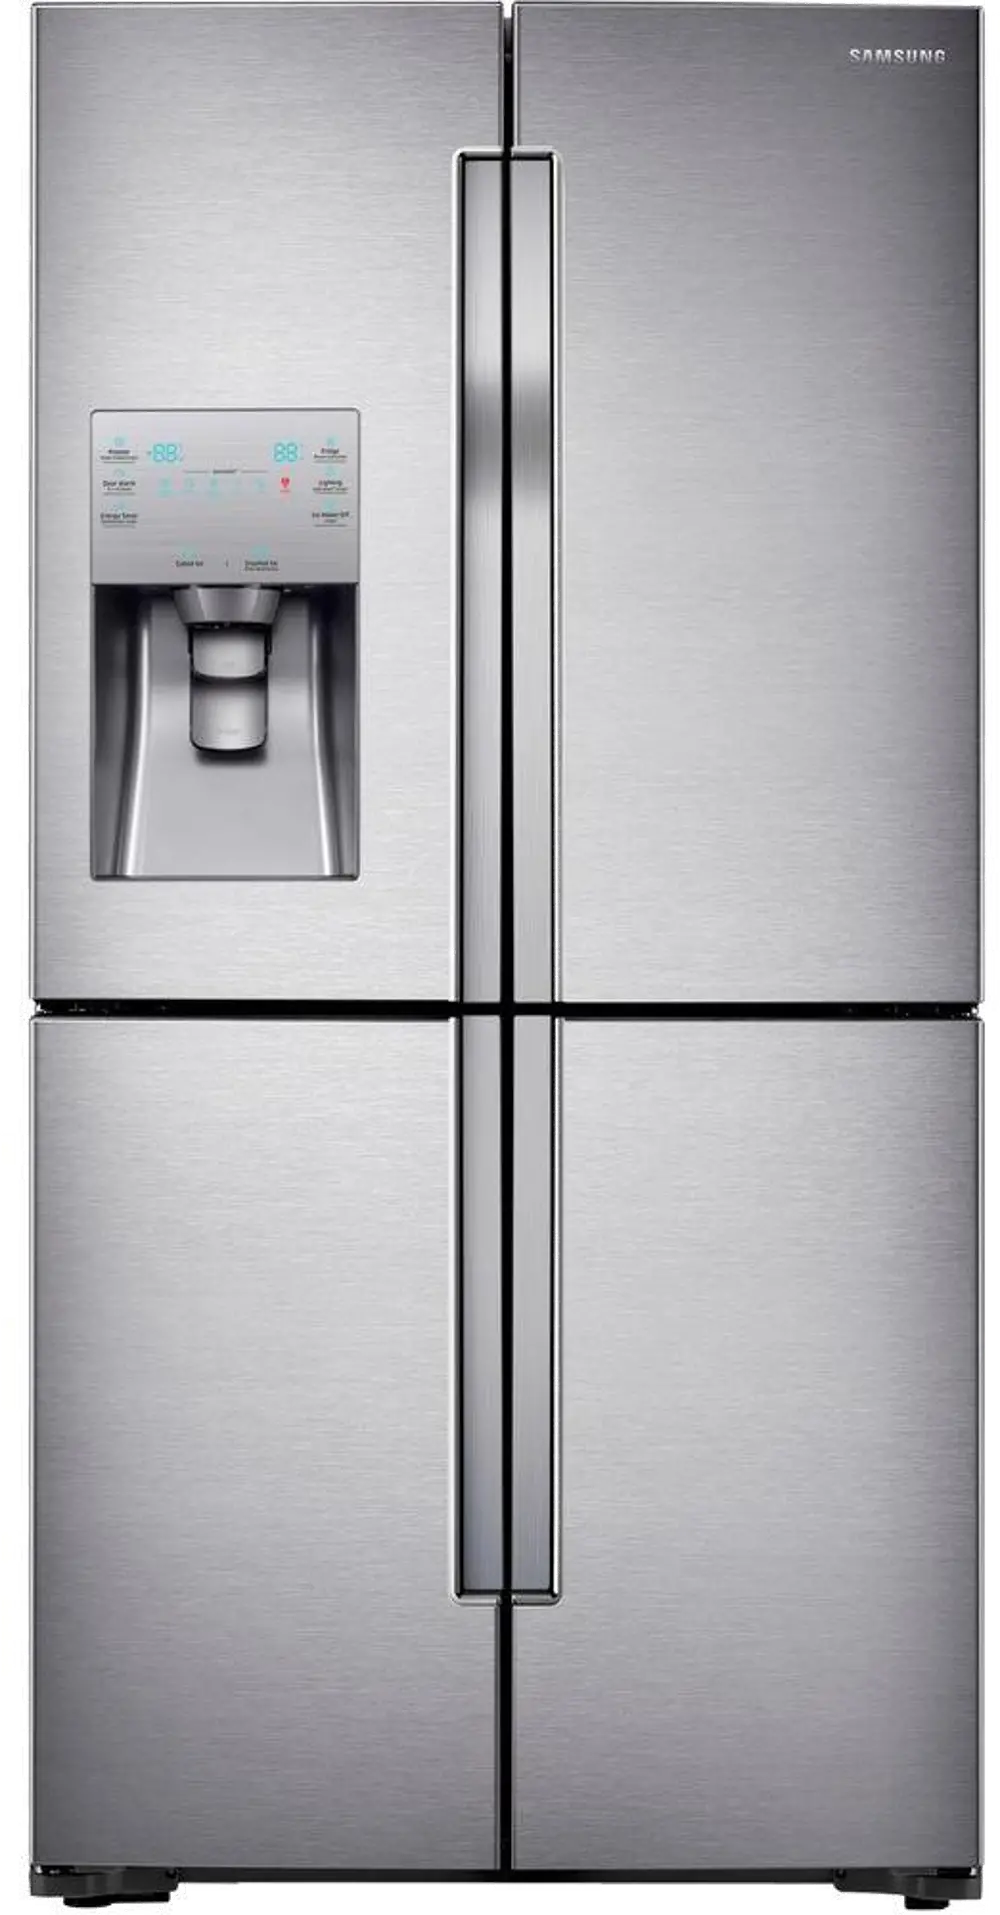 RF23J9011SR Samsung Counter Depth French Door Refrigerator with FlexZone - 22.5 cu. ft., 36 Inch Stainless Steel-1